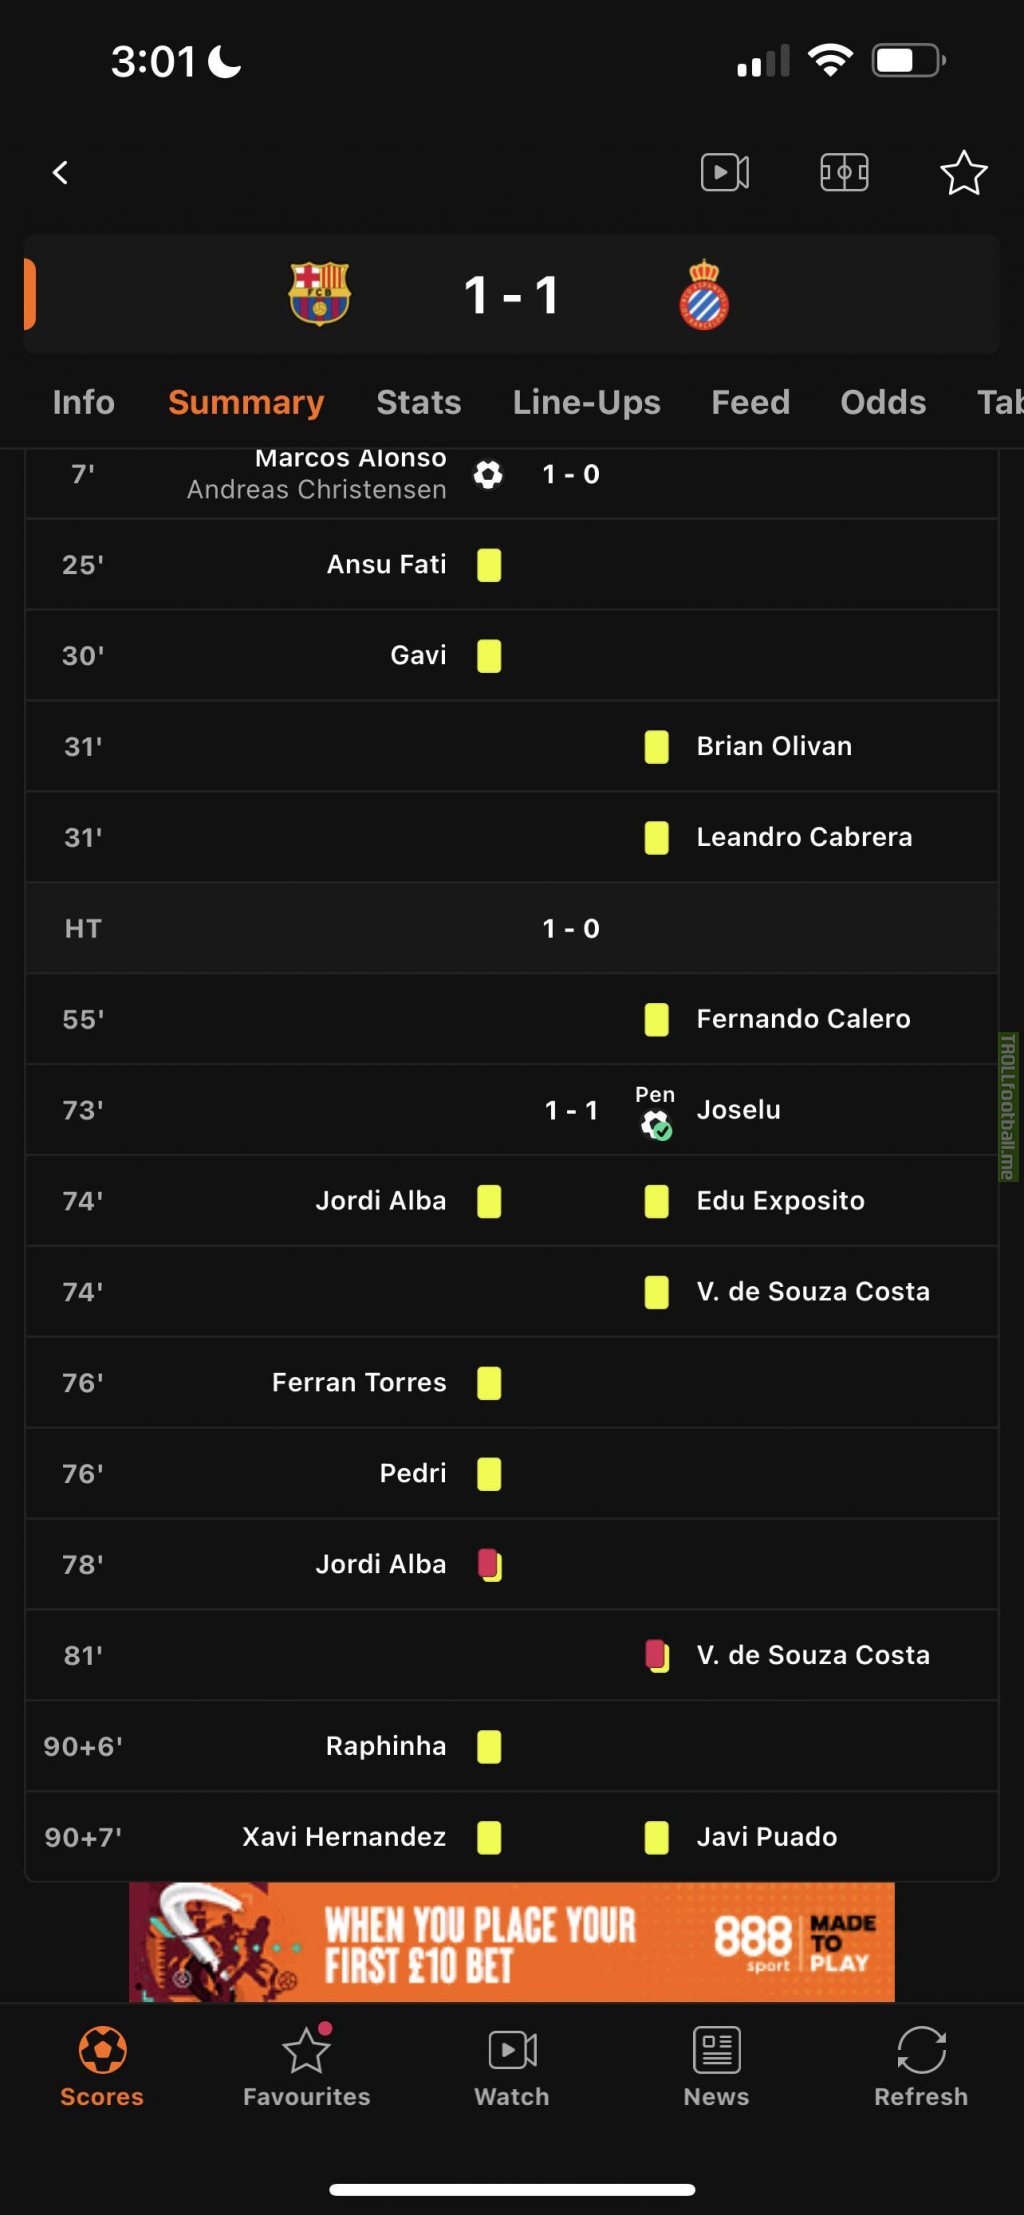 Lahoz producing 15 cards in his return to La Liga following his match refereeing Holland vs Argentina